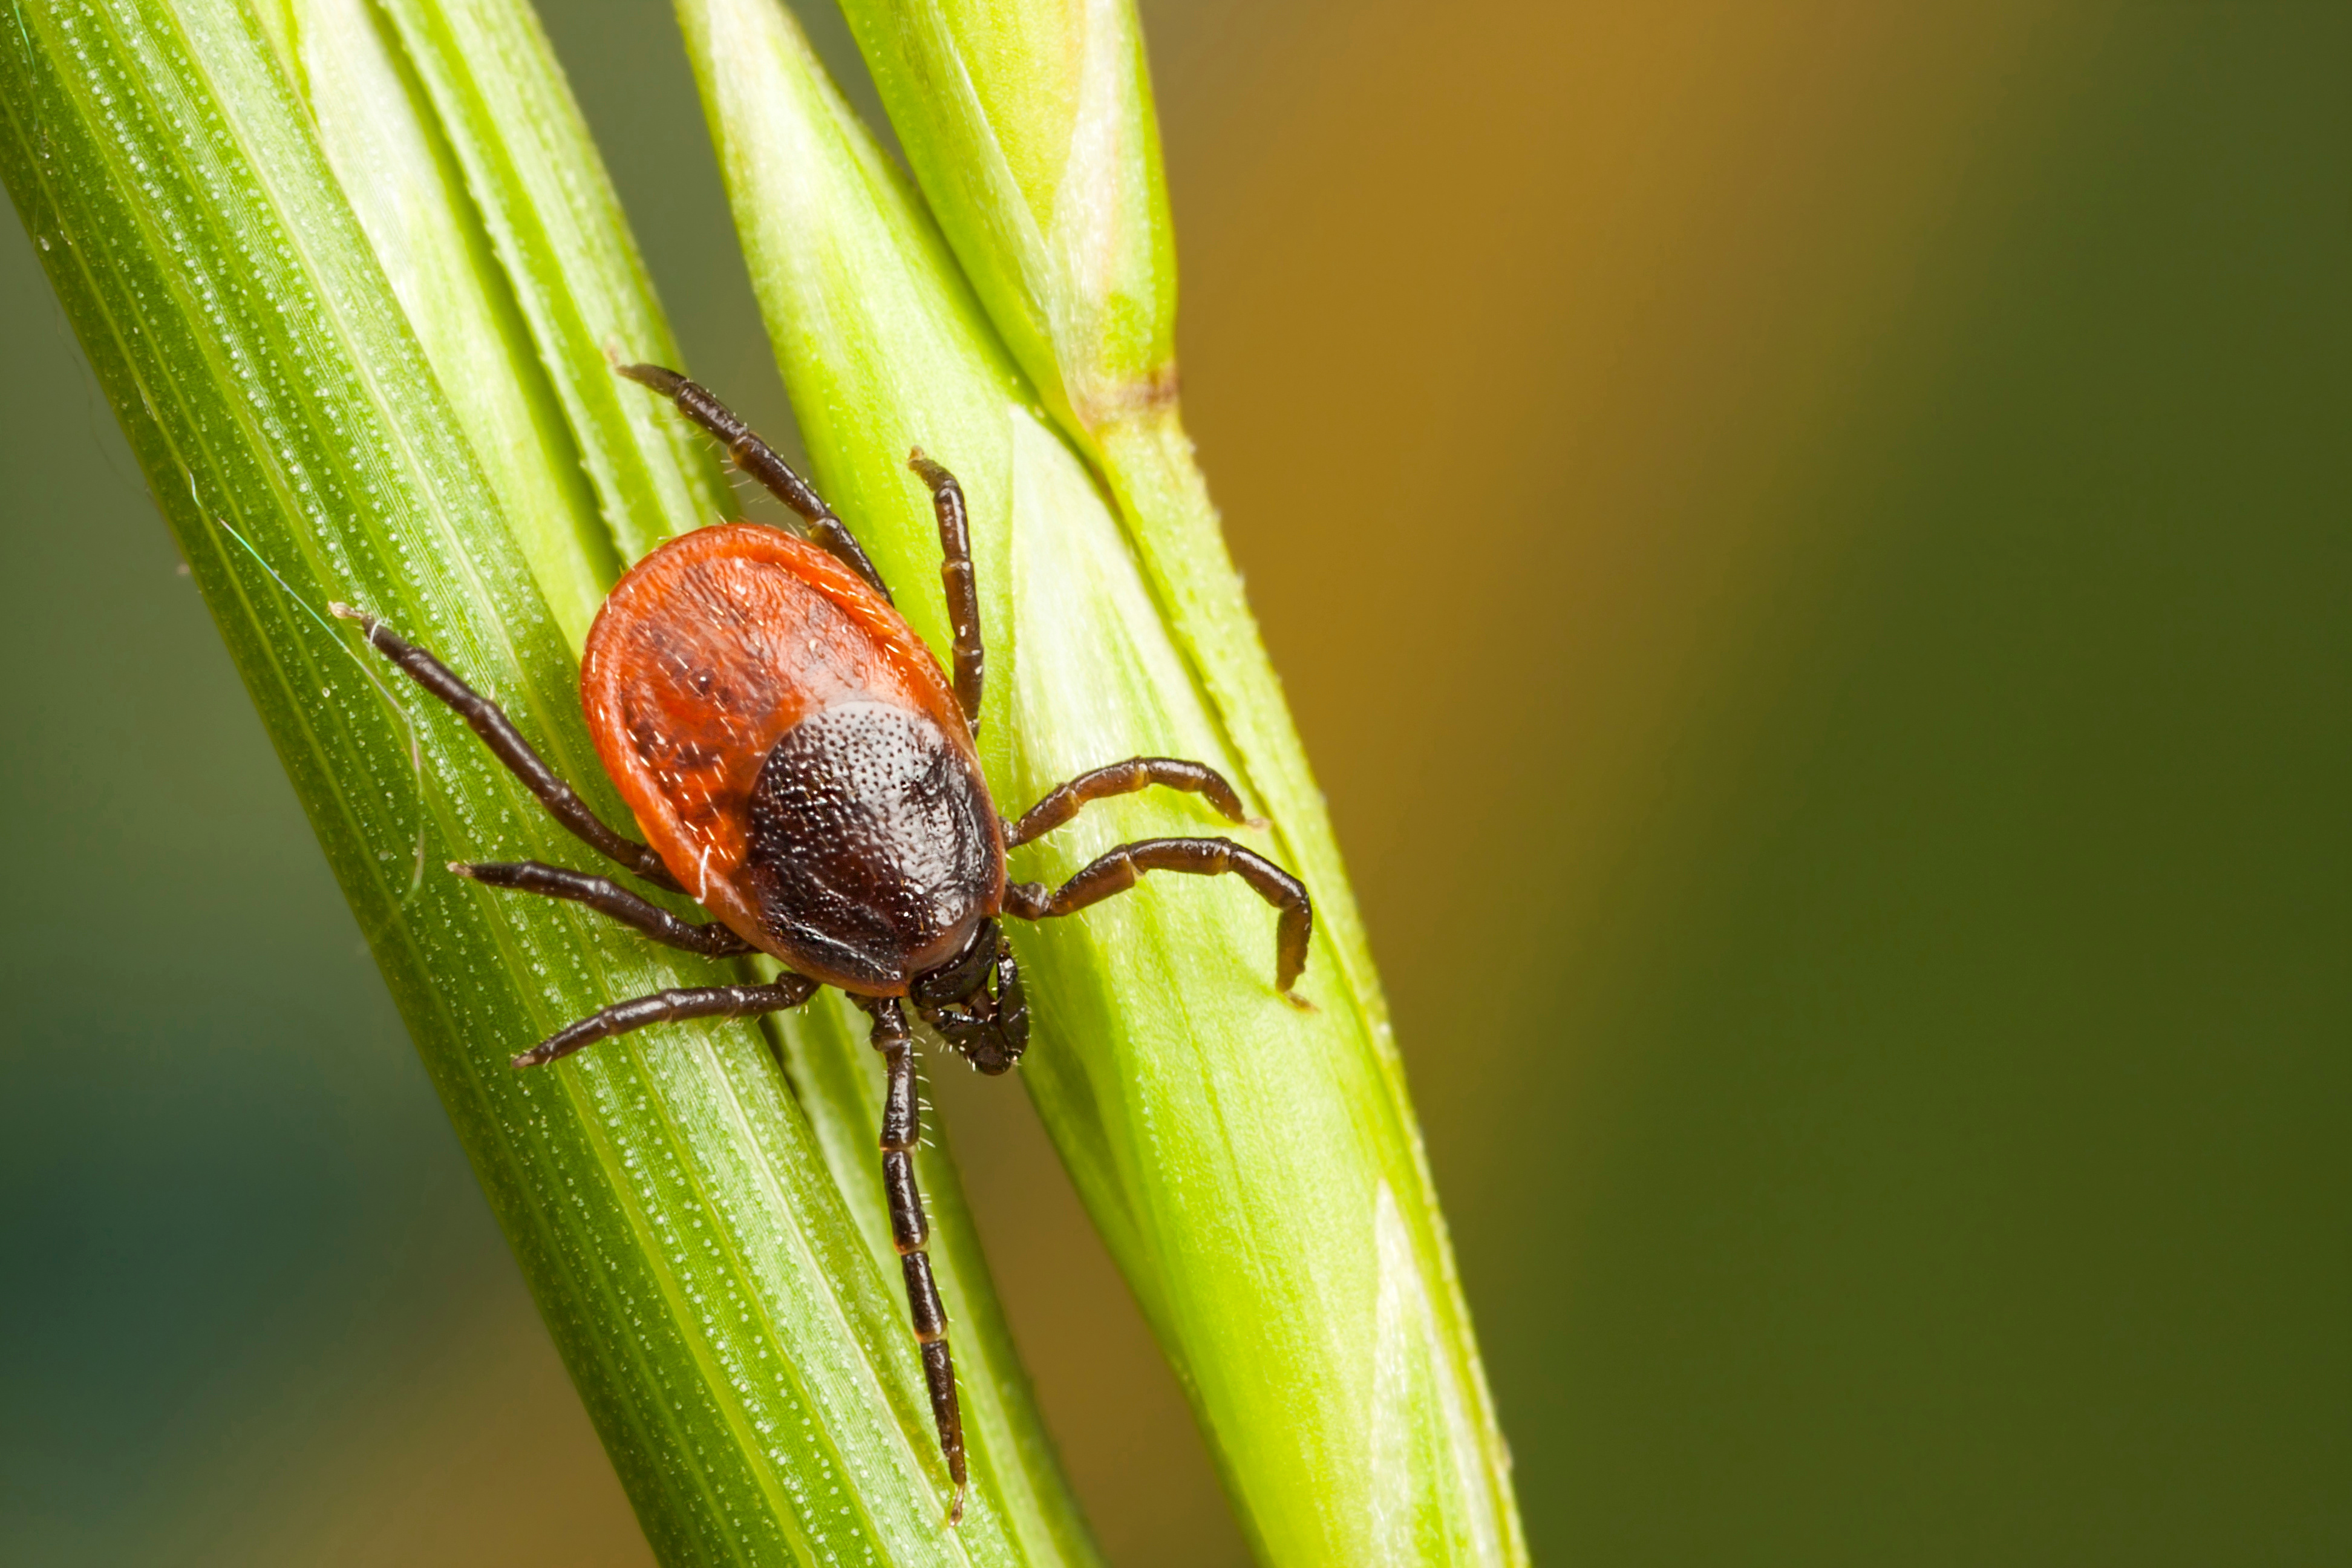 A tick on a leaf - do you need tick pest control in Waco, TX? Contact GGA Pest Management Waco today!